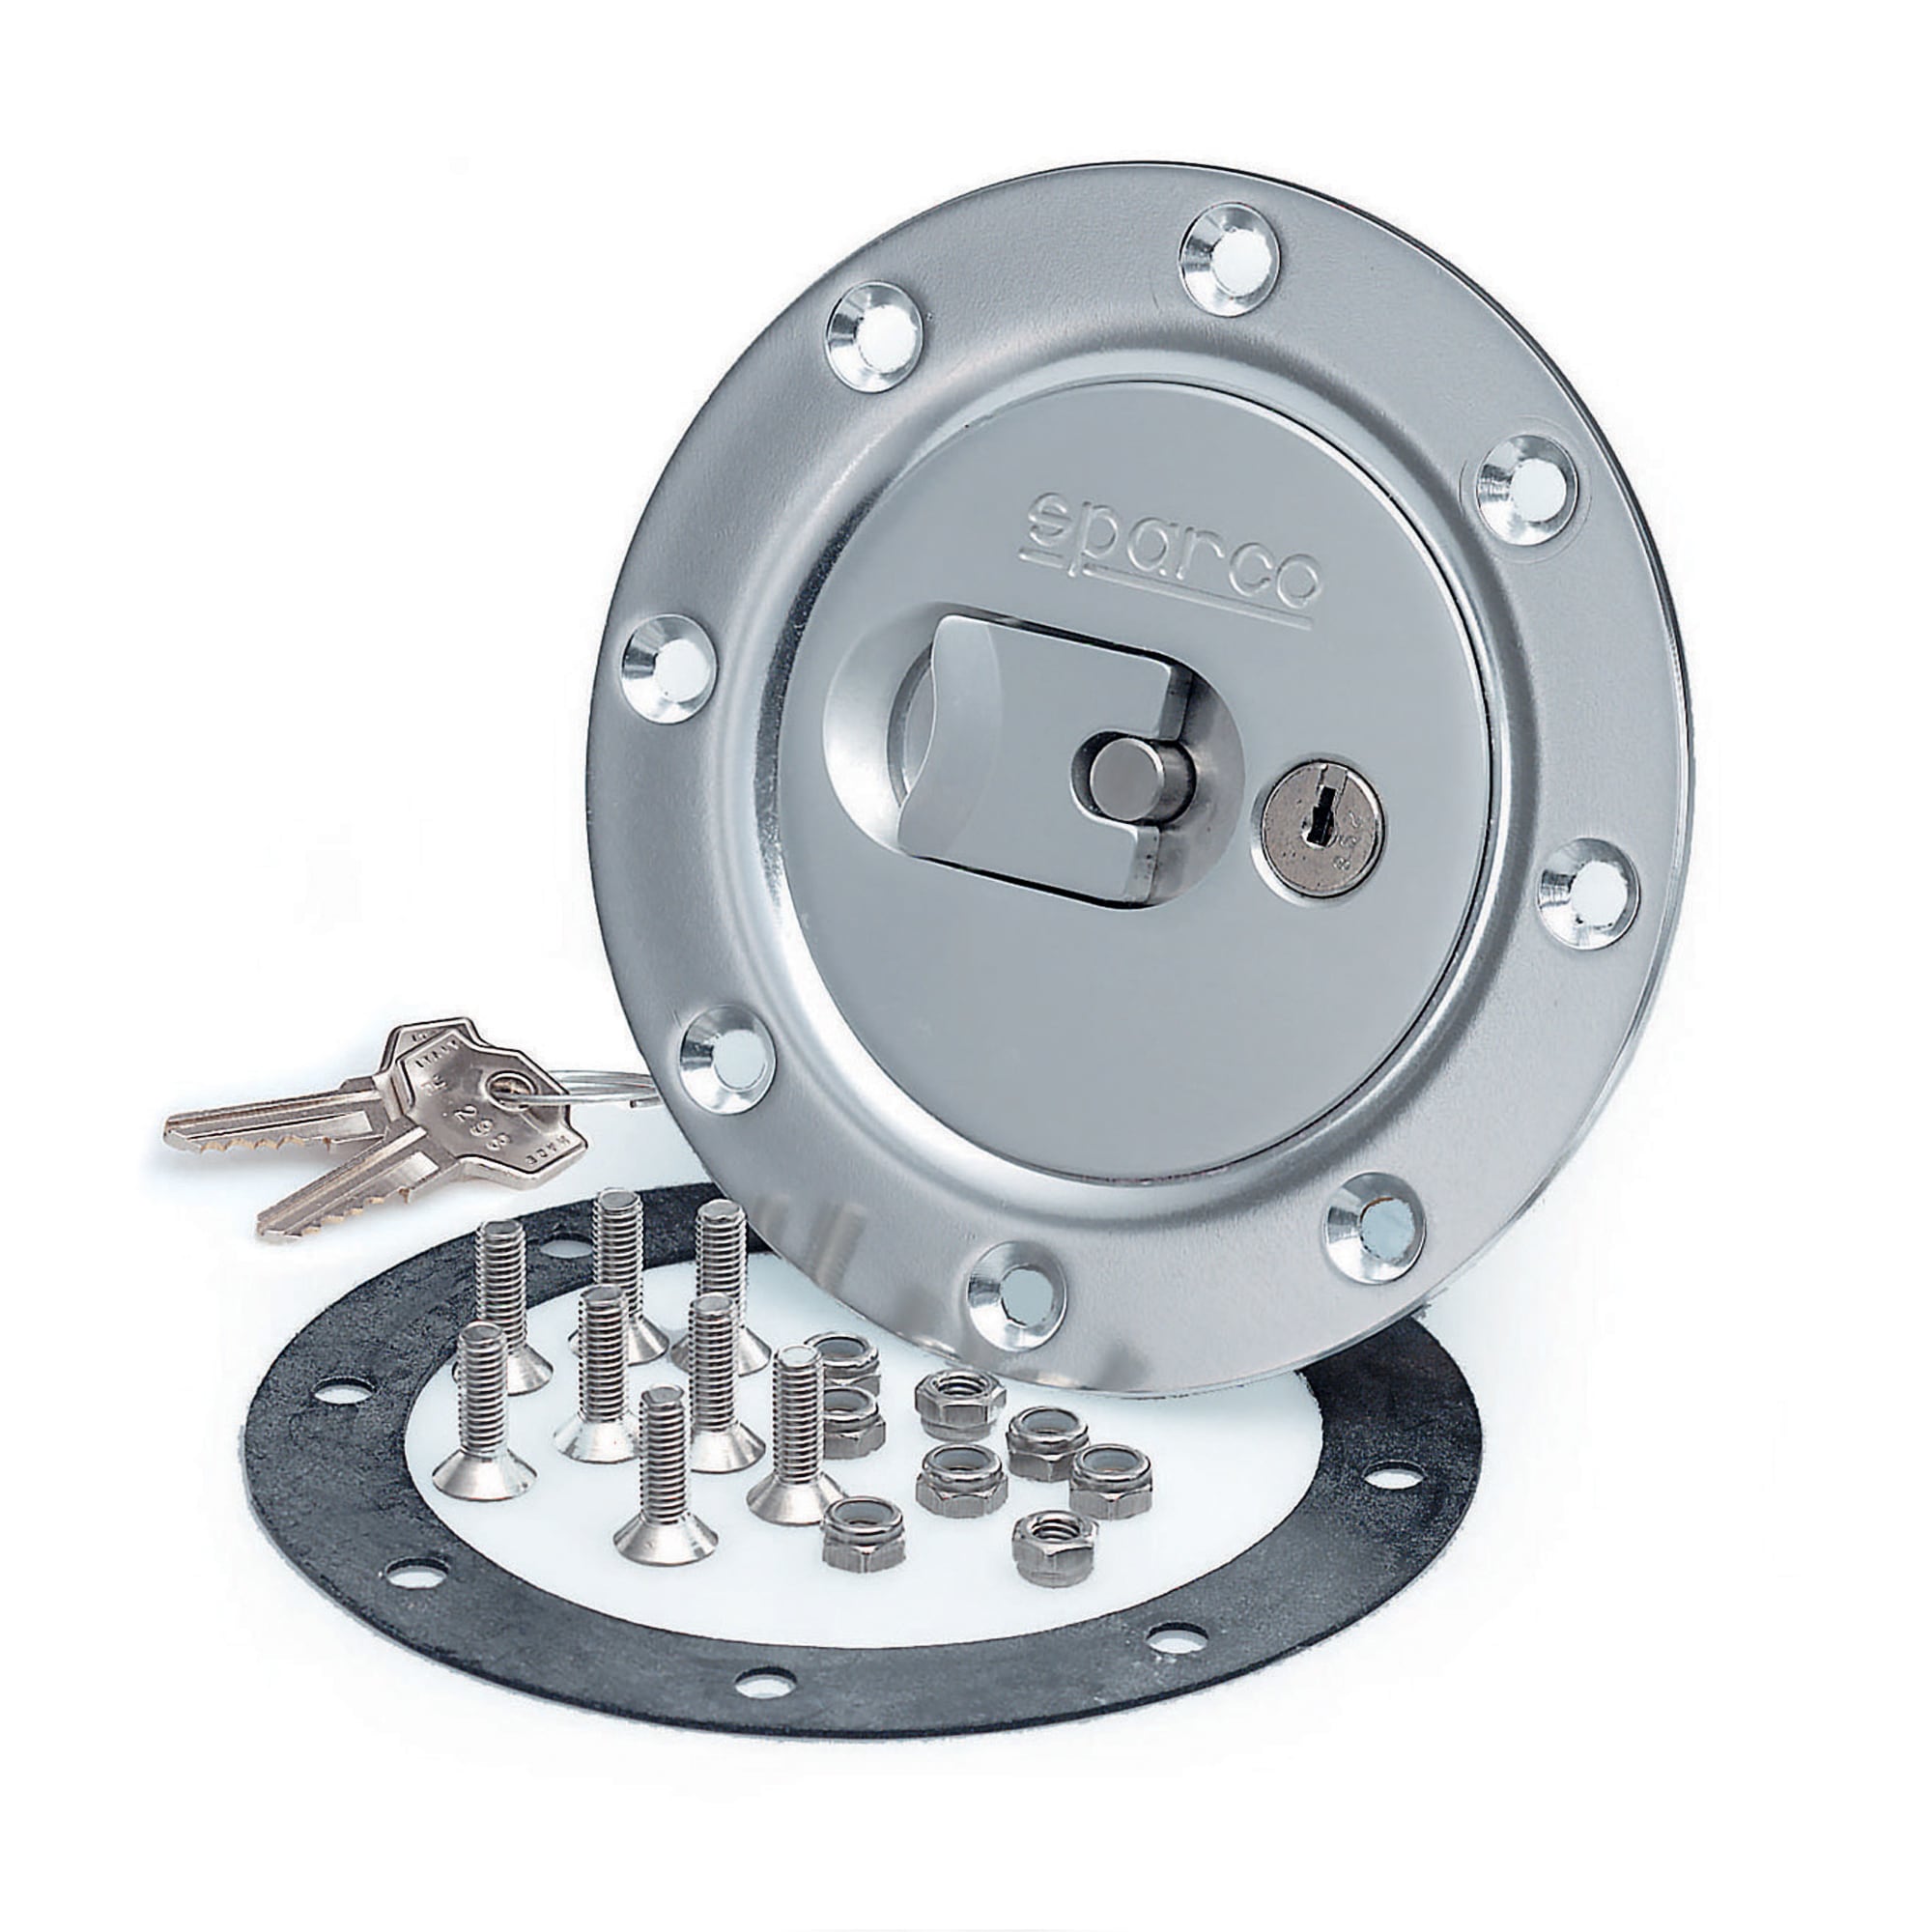 Gas Cap Sparco chrome with keylock